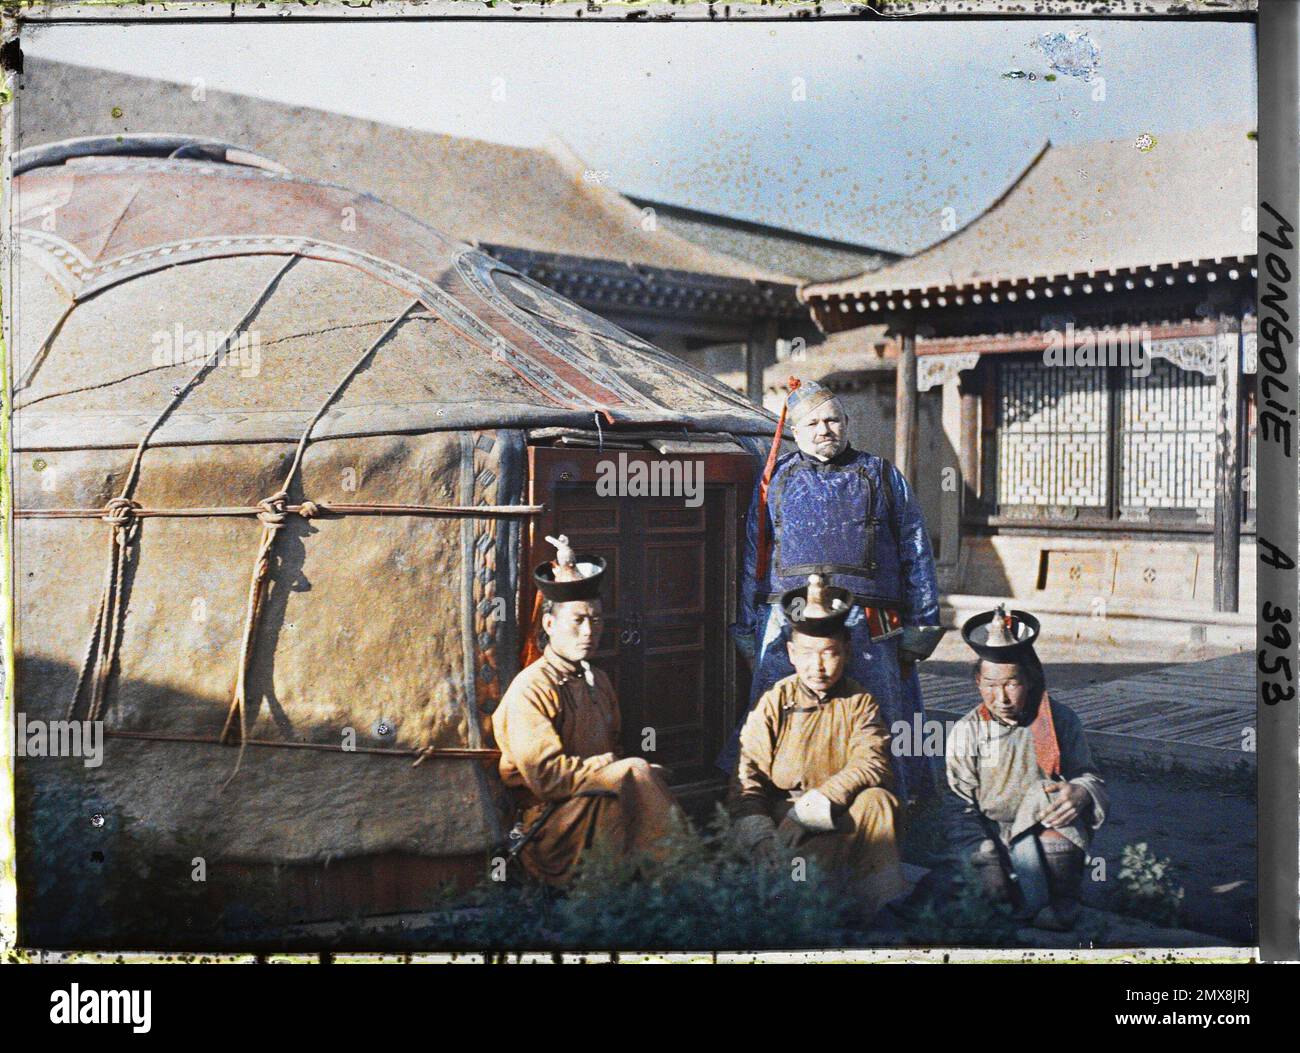 Ourga, Mongolia A Western dressed as a Mongolian dignitary with civil servants from the Bogd Khan Court , 1913 - Mongolia - Stéphane Passet - (July 6-25) Stock Photo